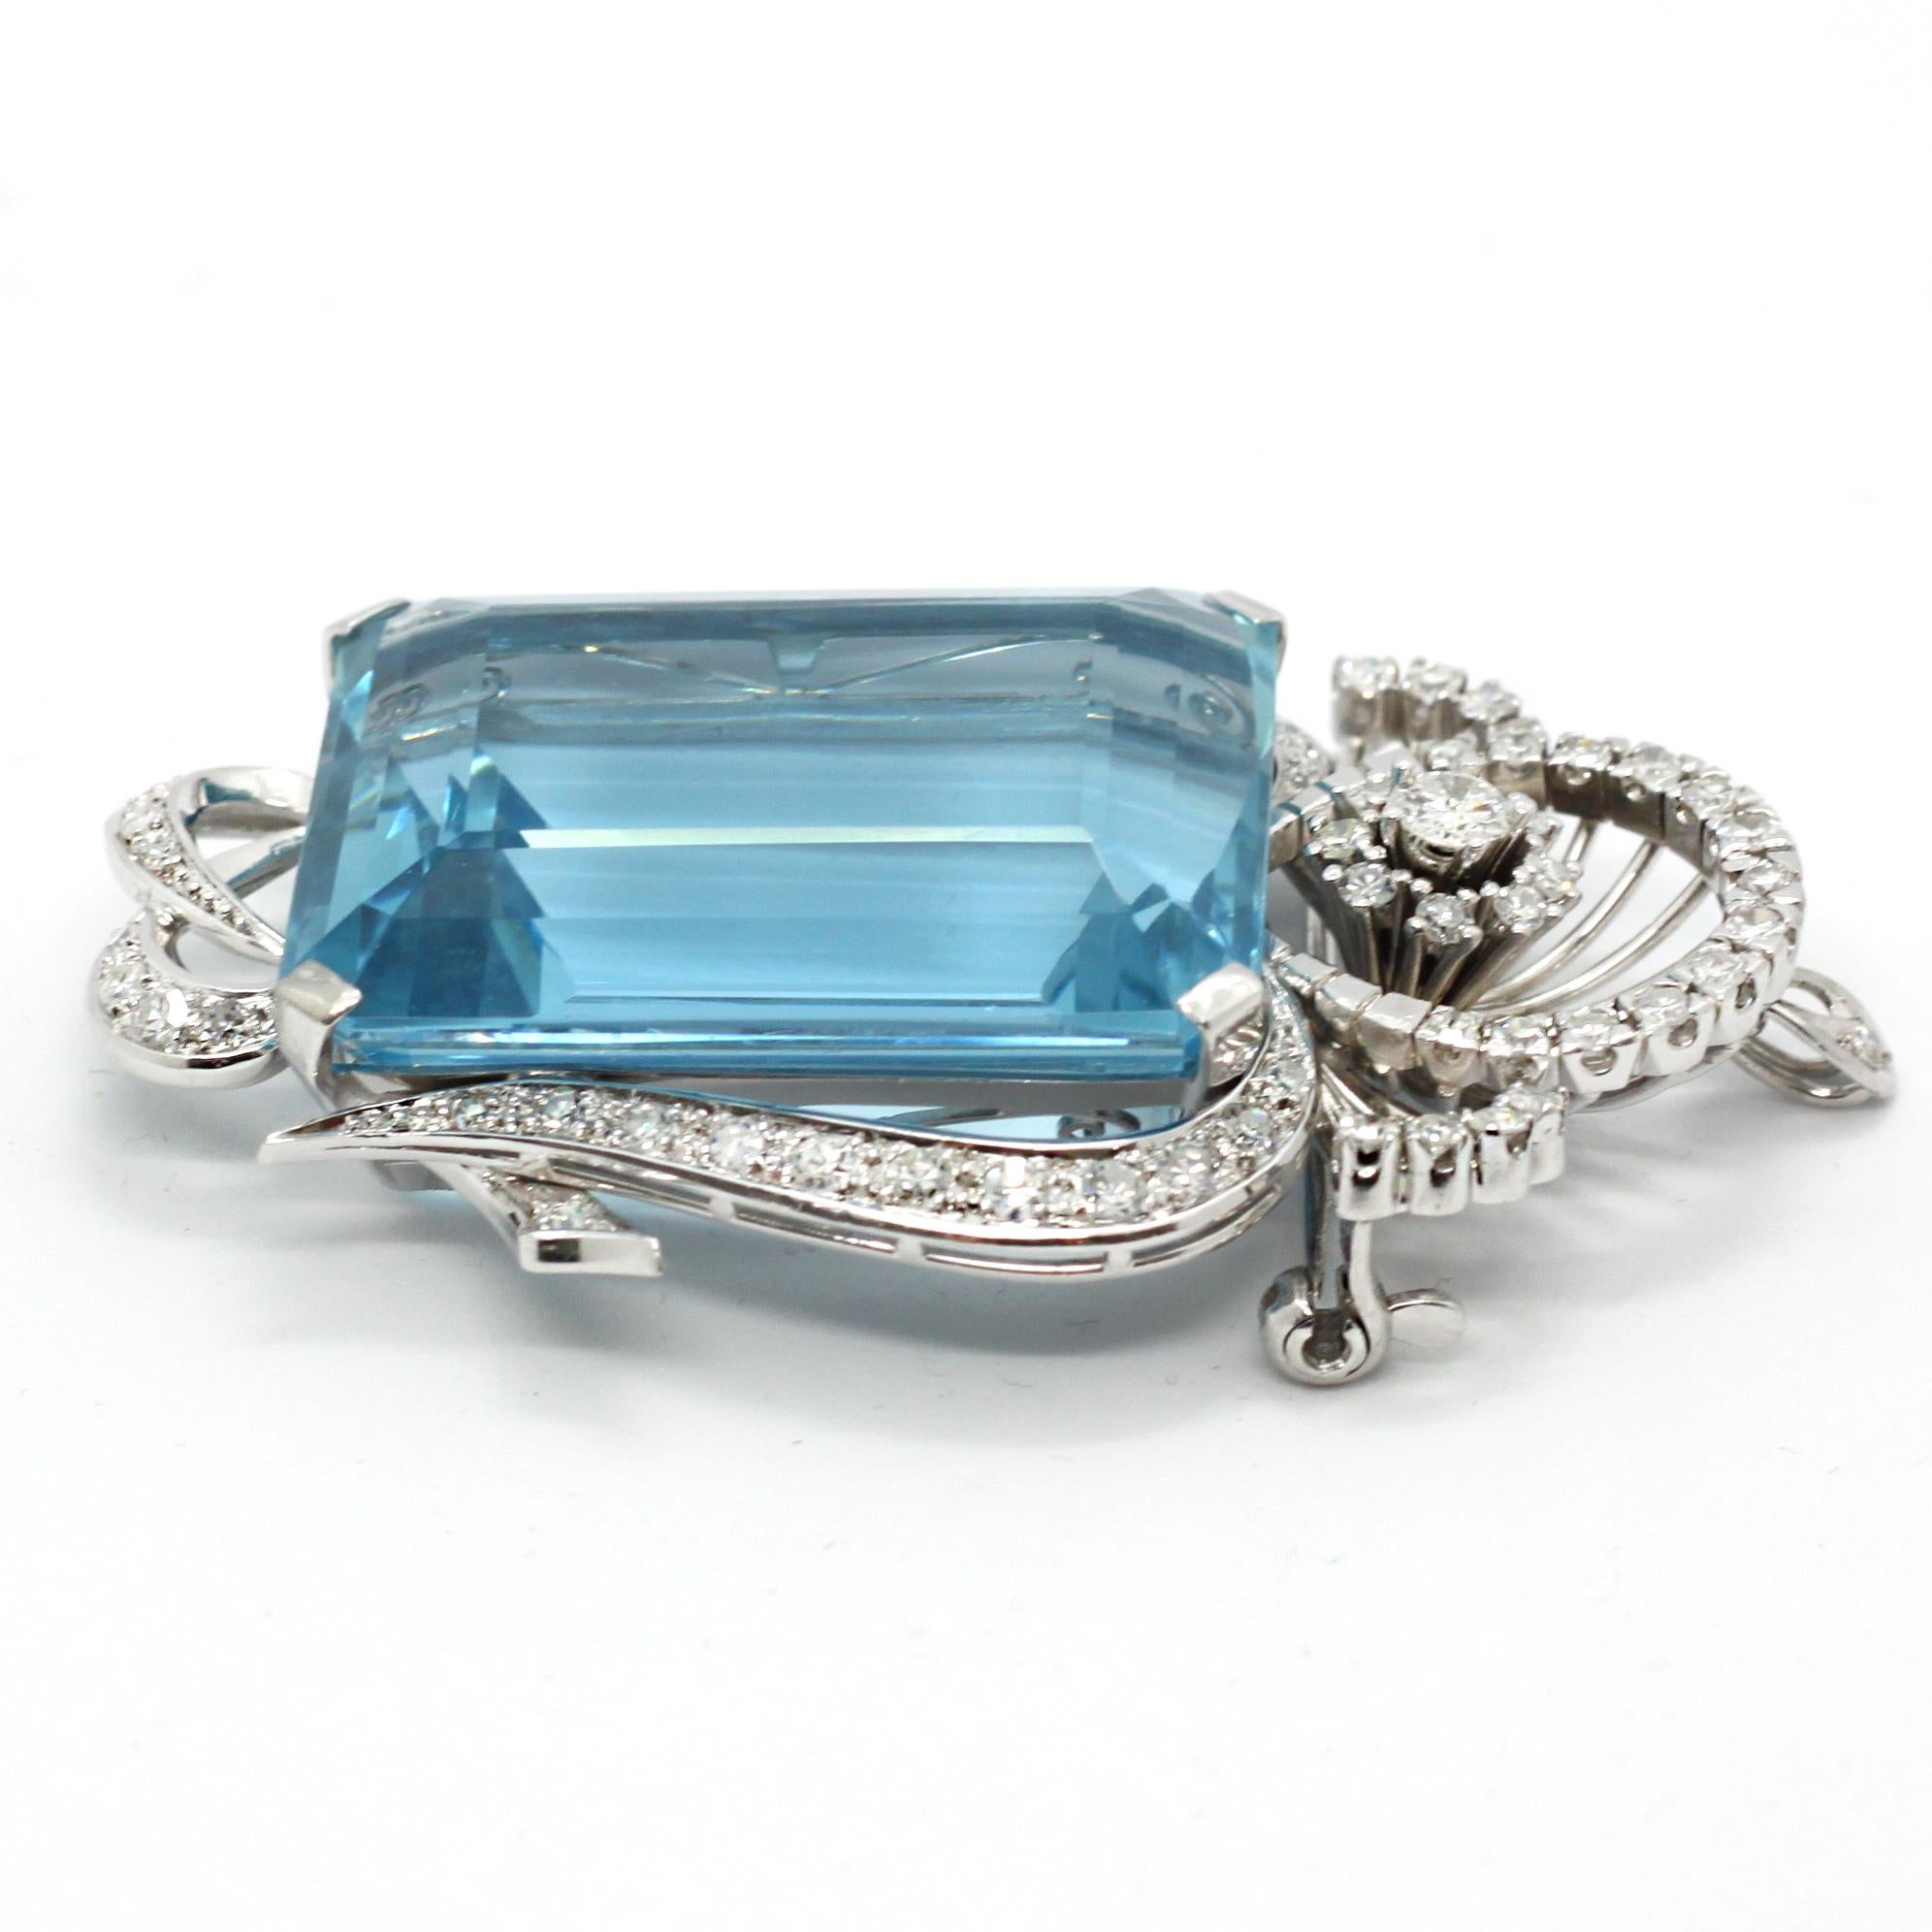 An impressive aquamarine and diamond pendant in platinum, 1960s. The rectangular aquamarine has a beautiful blue colour and weighs circa 80 carats. It is surround by round diamonds with the design embracing the important aquamarine. This item can be